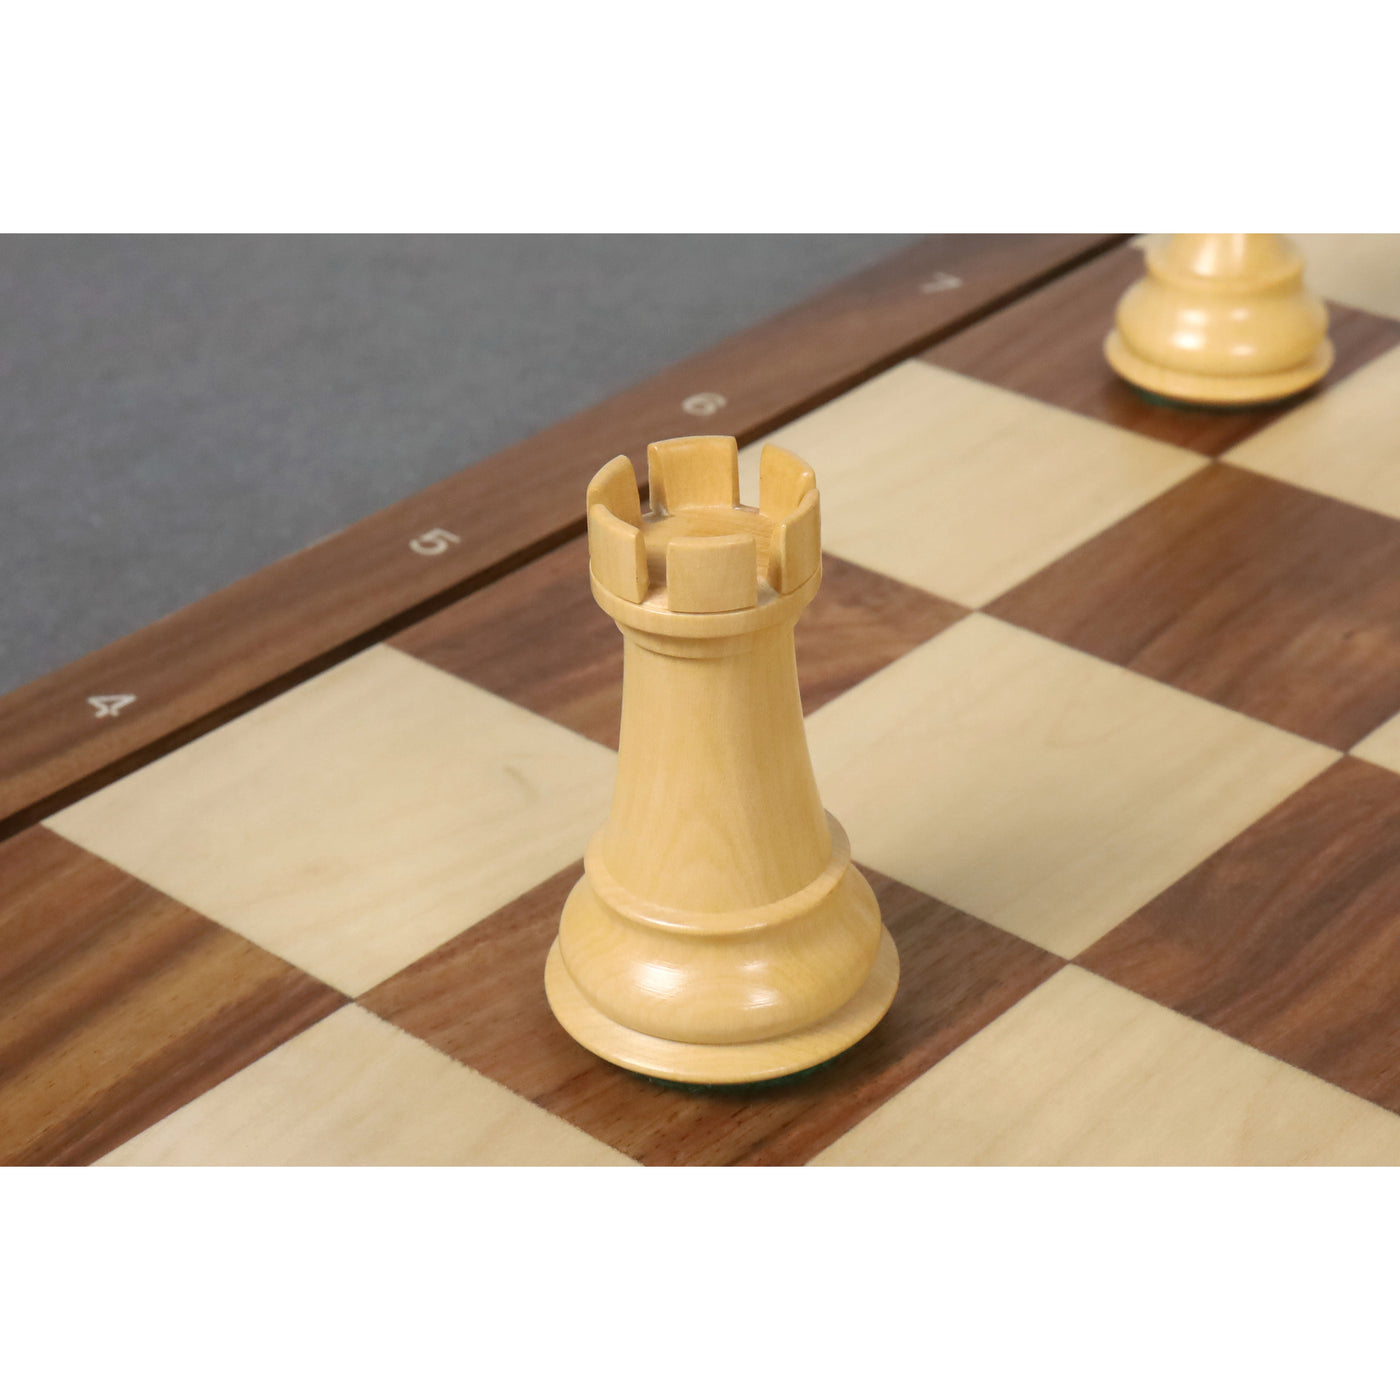 Majestic Series Staunton Chess Pieces Only set